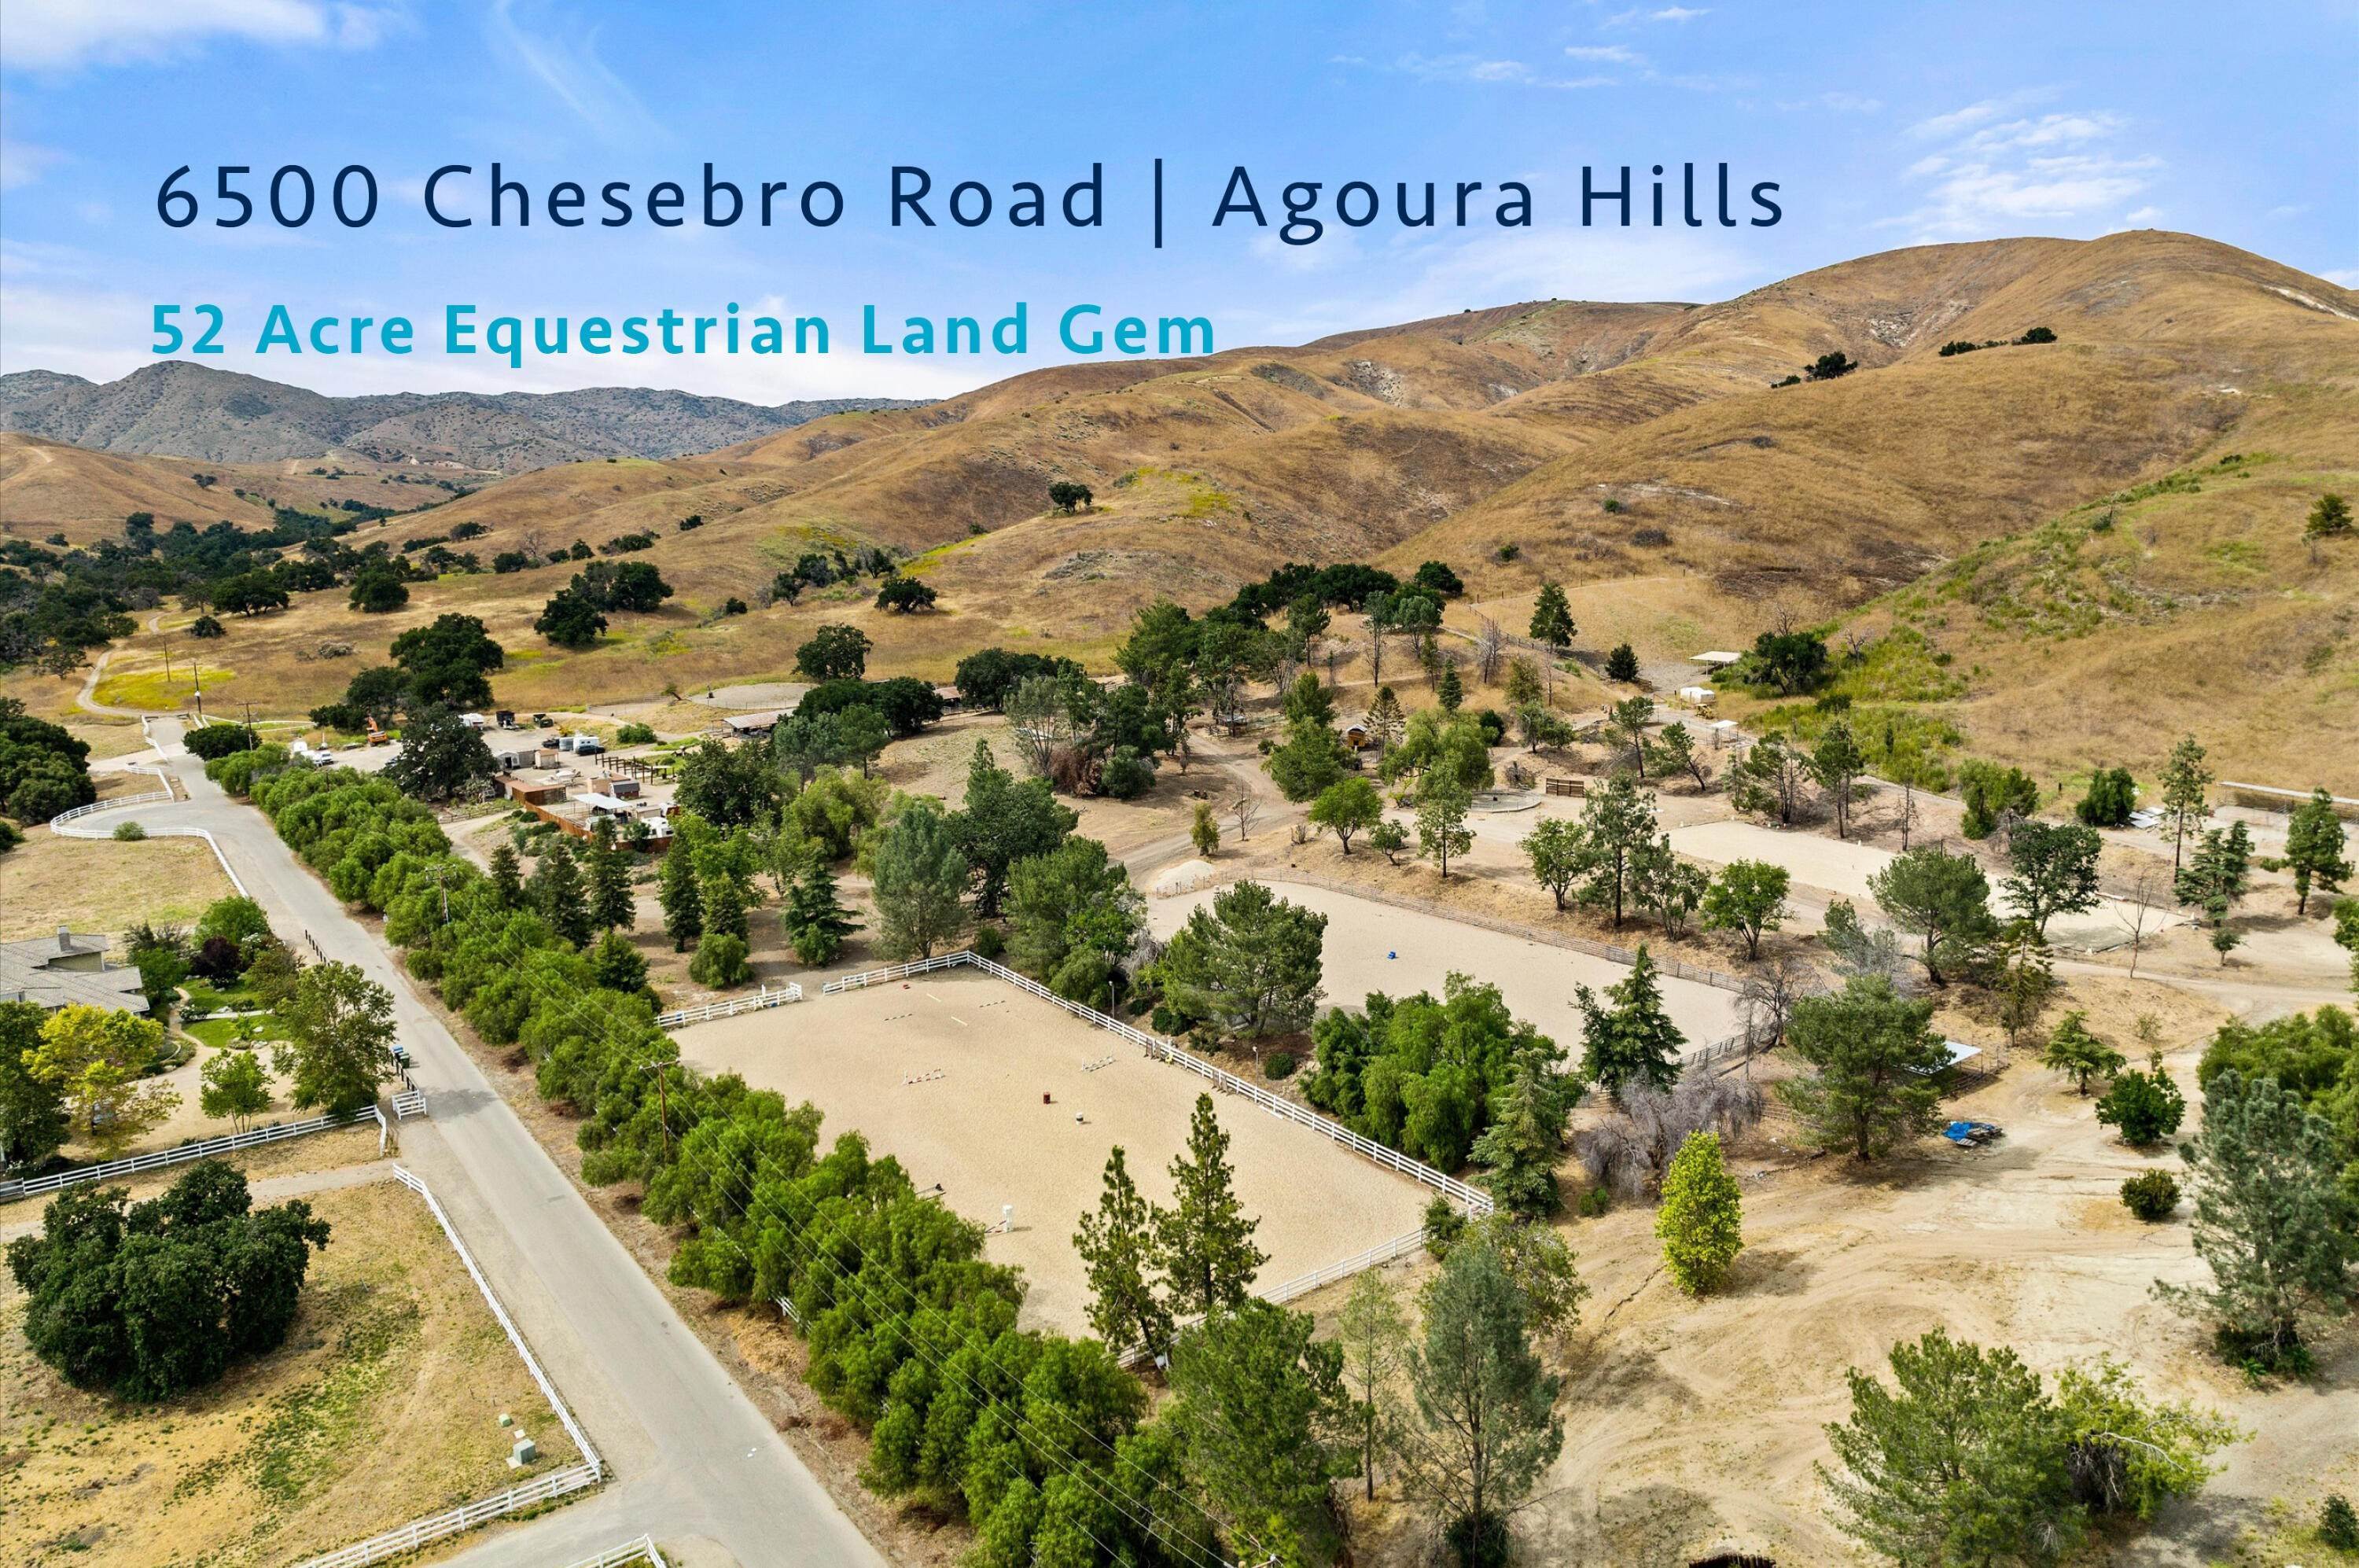 Lots / Land for Sale at 6500 Chesebro Road Agoura Hills, California 91301 United States